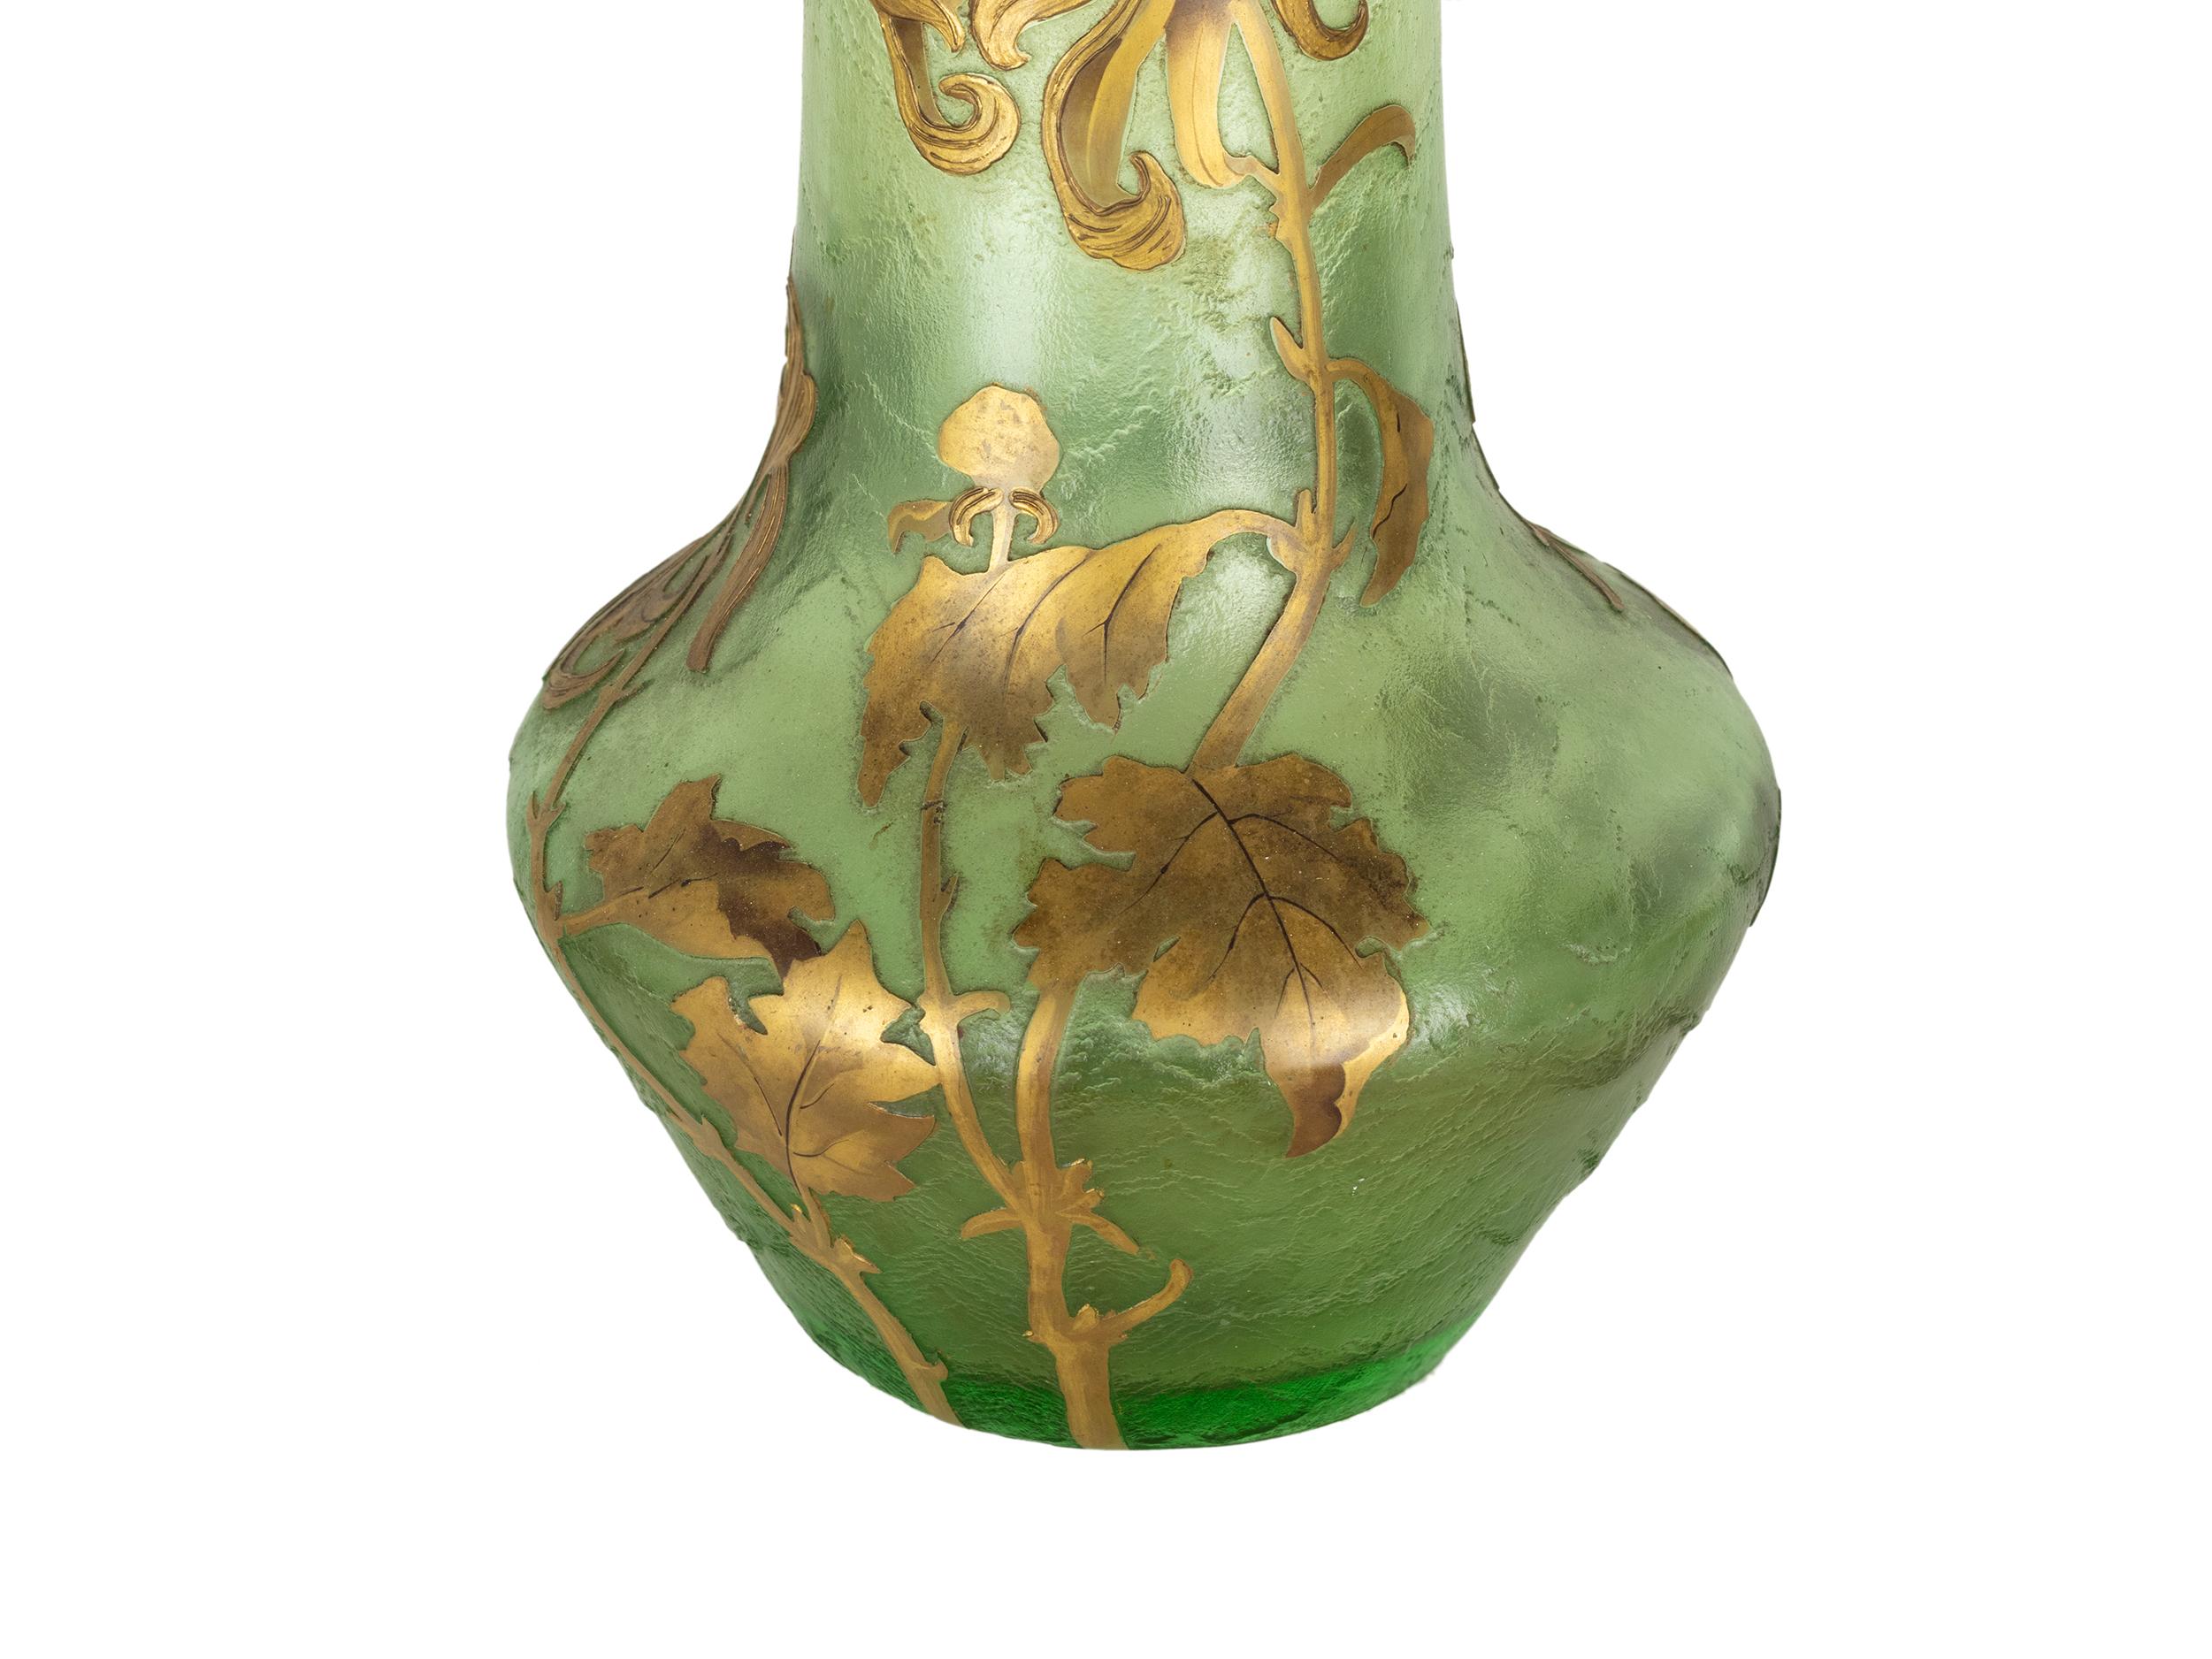 20th Century Montjoye, France, Large Art Nouveau Vase in Mouth-Blown Art Glass, 1880-1900 For Sale